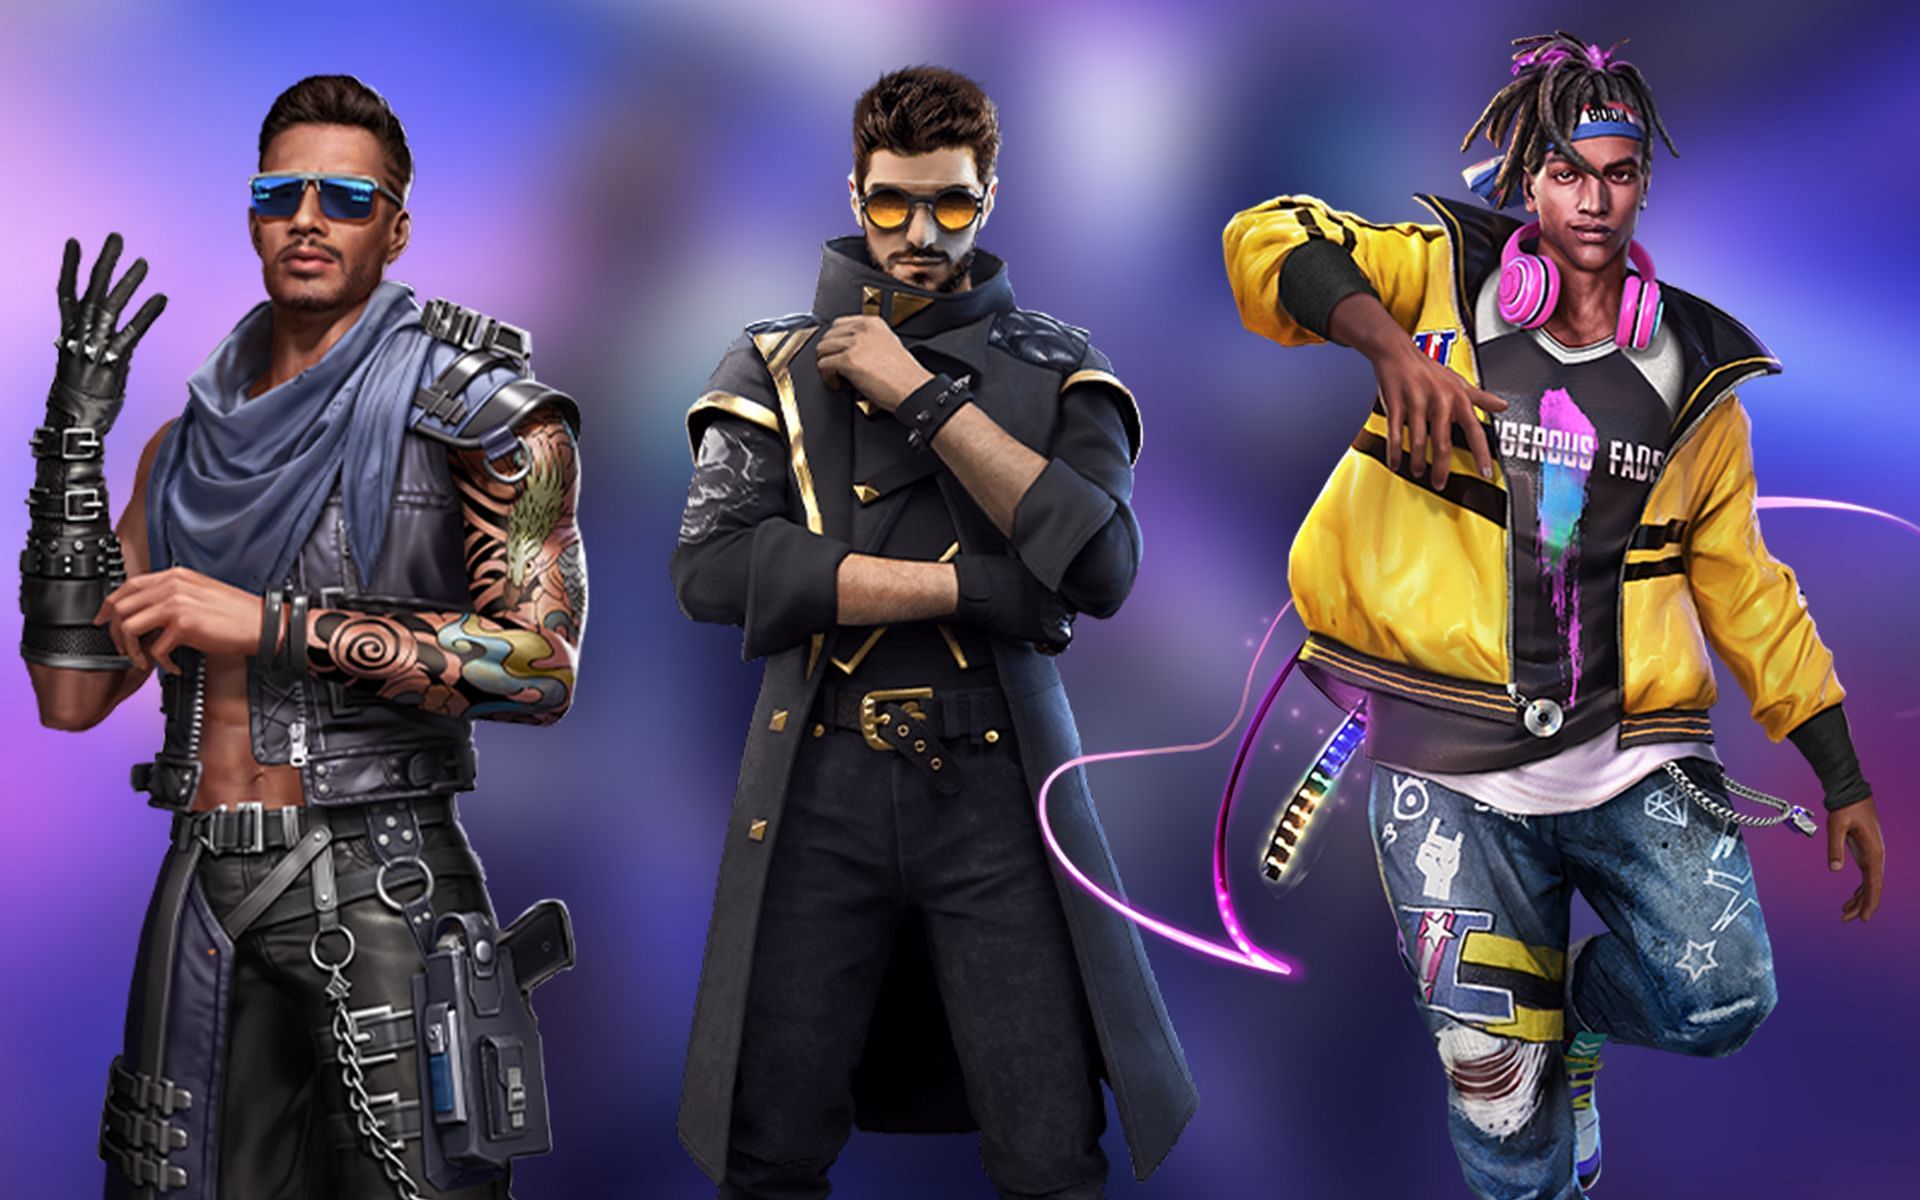 Make rank pushes great again by using these Free Fire characters (Image via Sportskeeda)